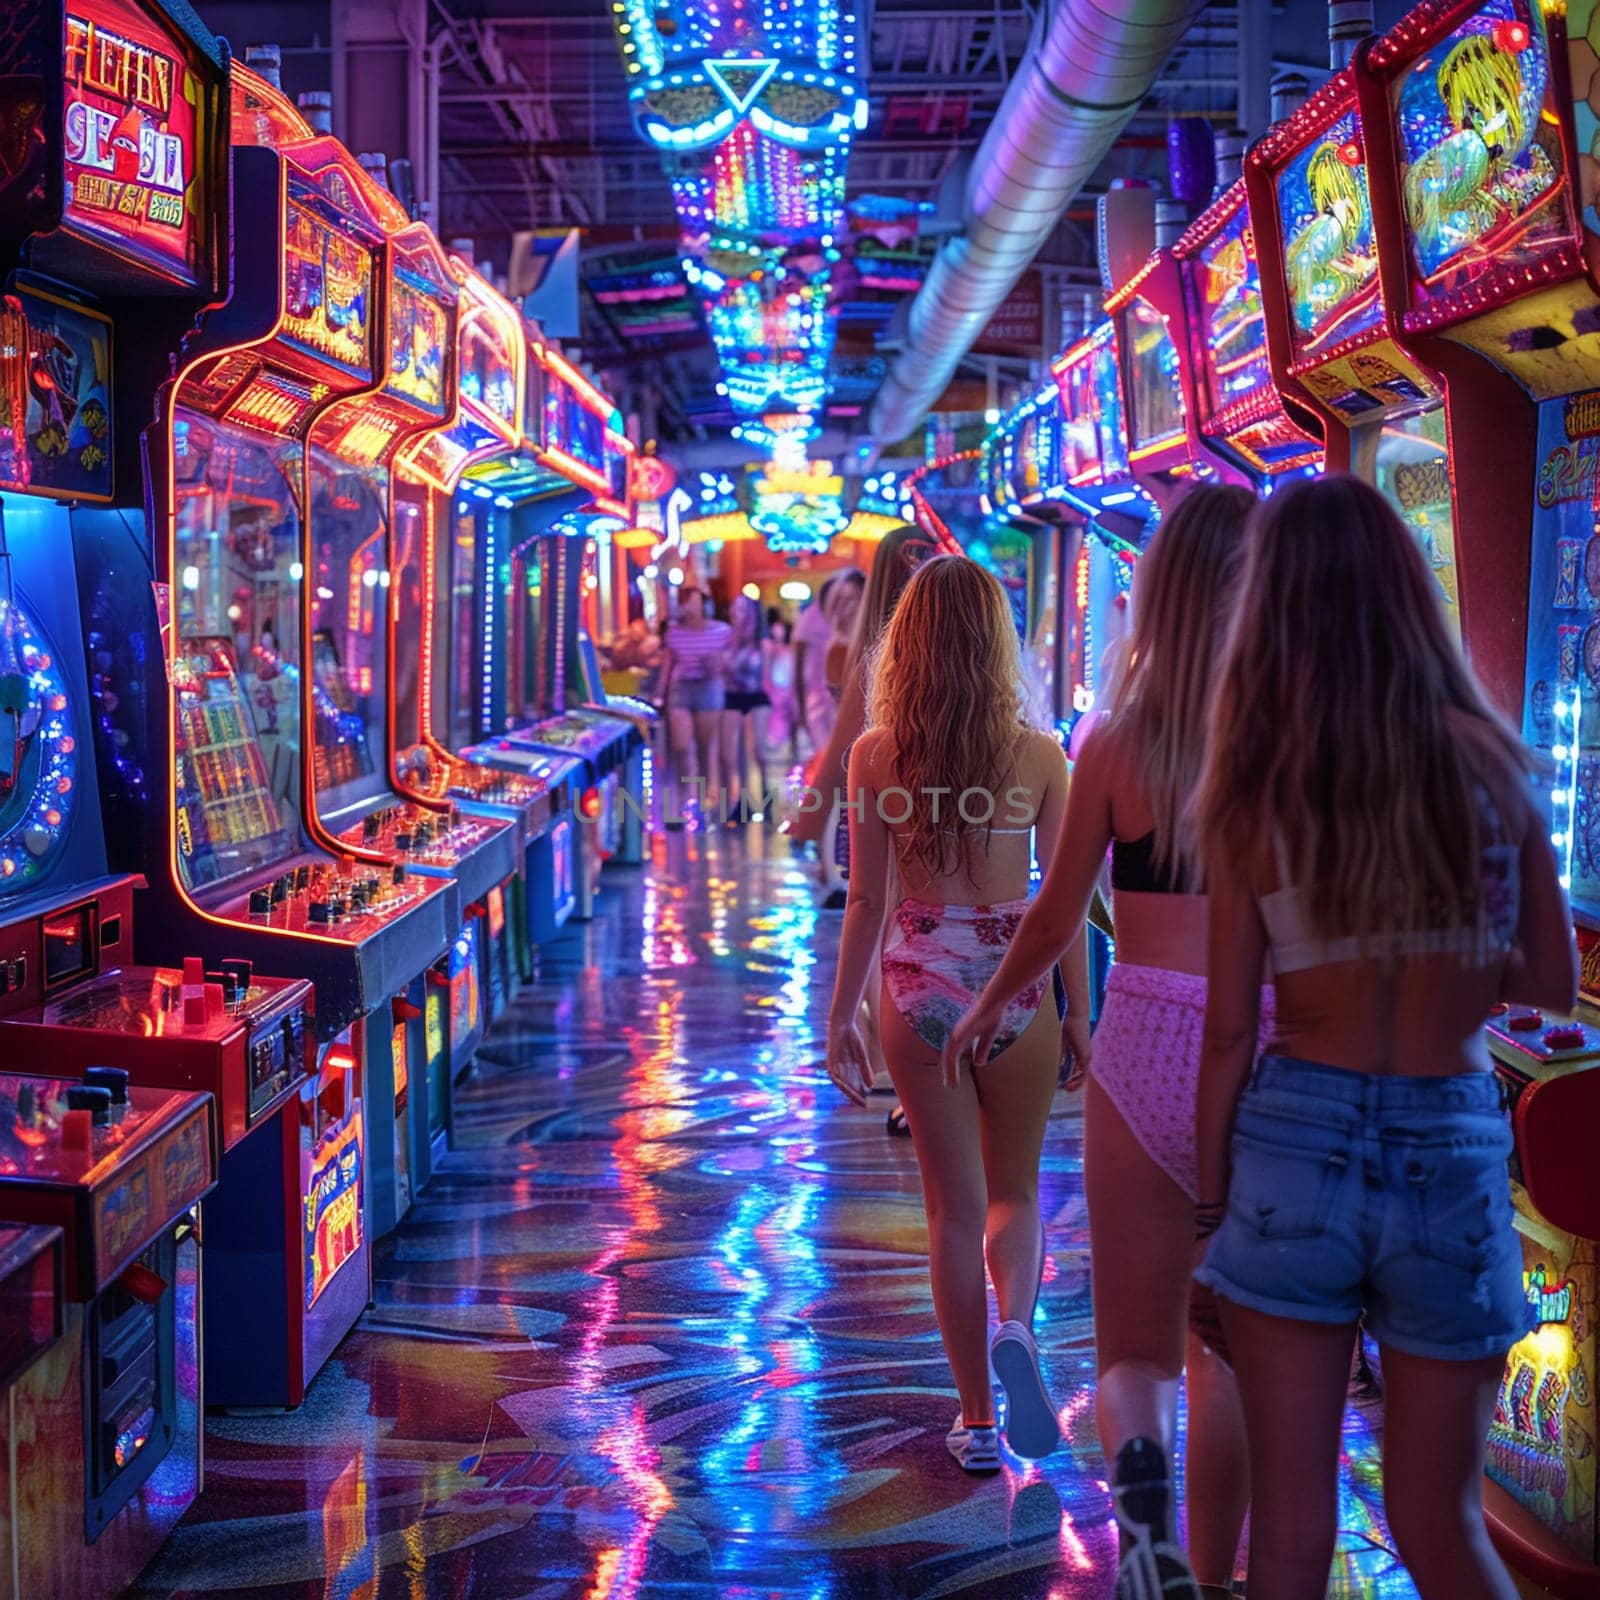 Neon-Lit Arcade with Games and Players in a Blur of Fun, The streaks of light and excitement capture the lively atmosphere of gaming and entertainment.